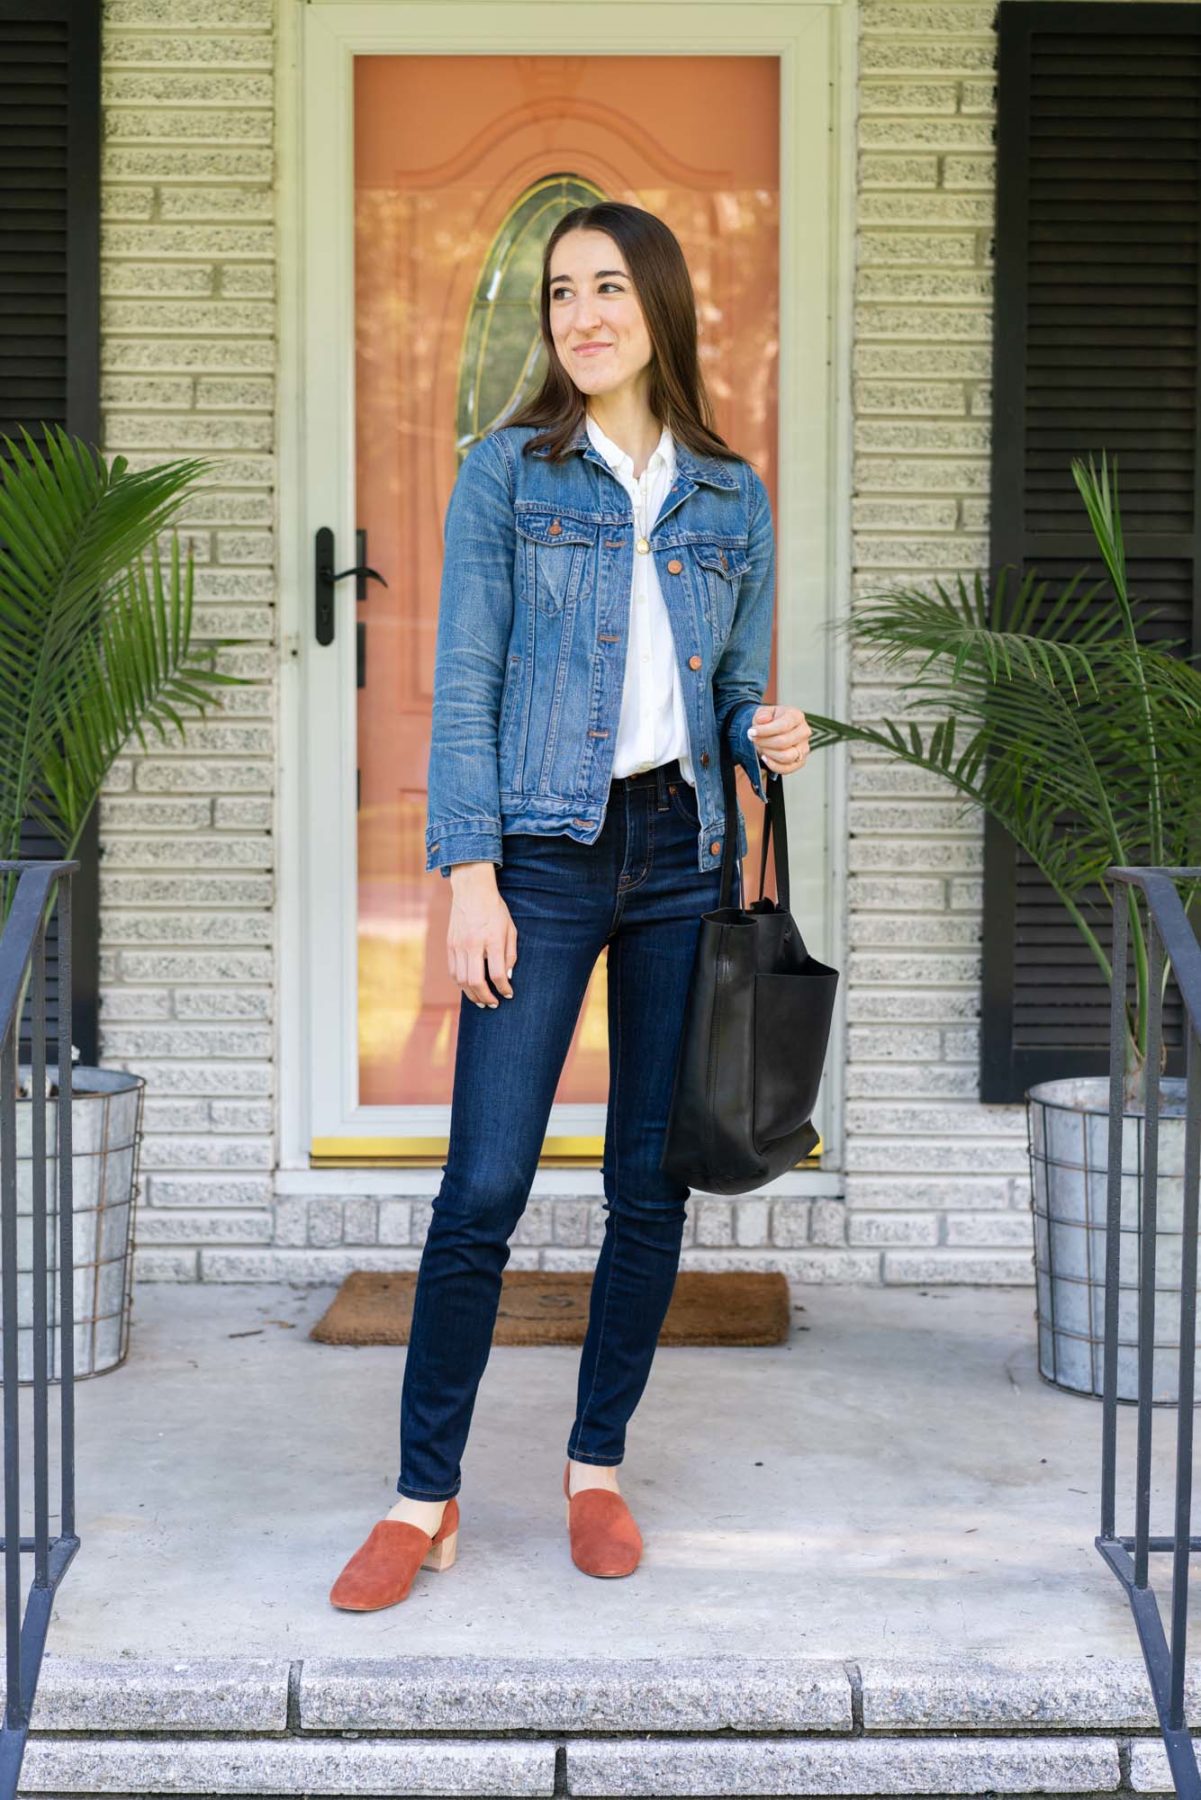 Woman standing on her front porch wearing Madewell denim, a denim jacket, button up shirt, and Madewell tote bag